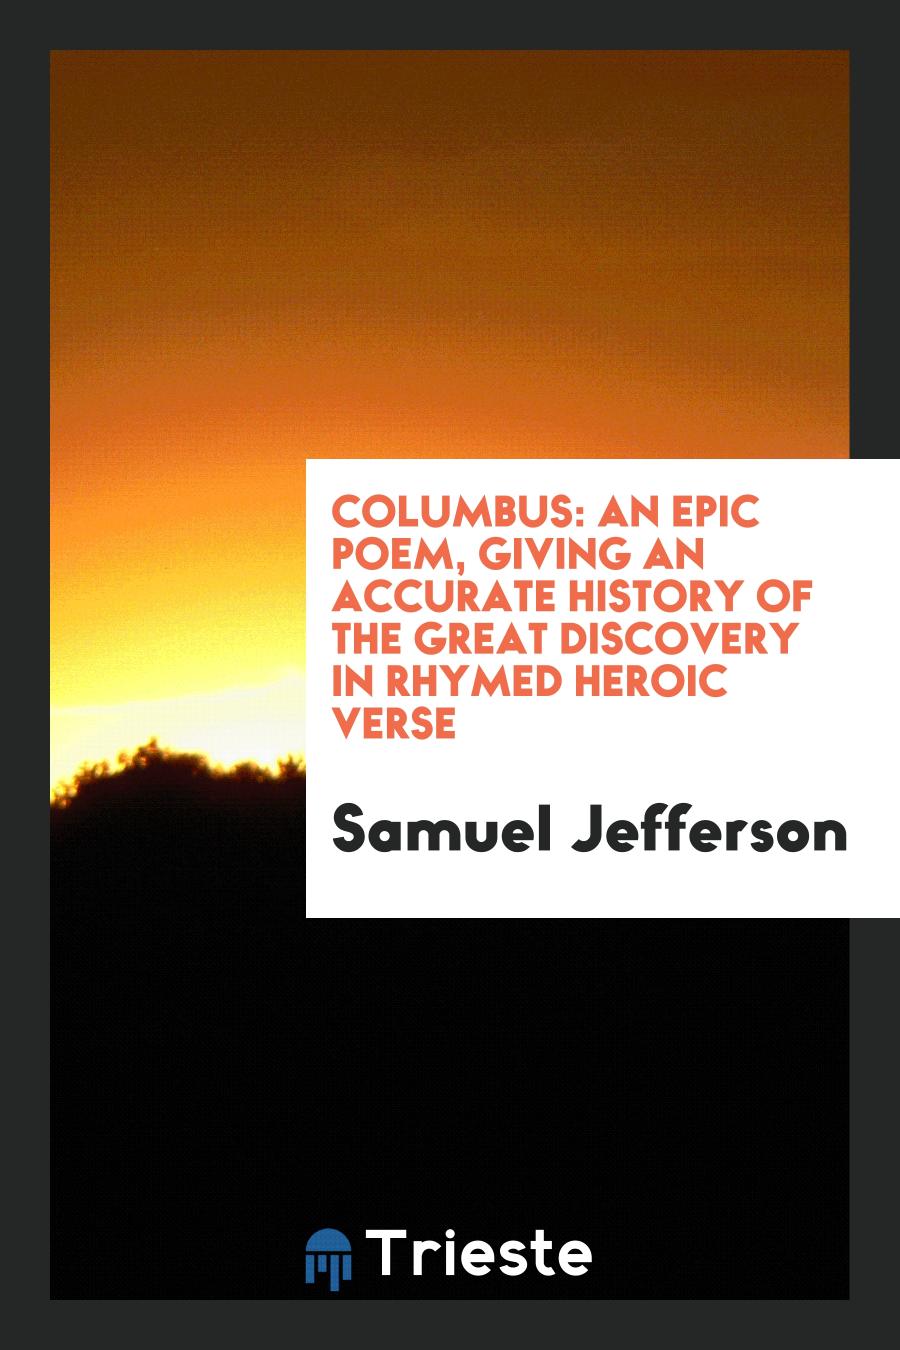 Columbus: An Epic Poem, Giving an Accurate History of the Great Discovery in Rhymed Heroic Verse